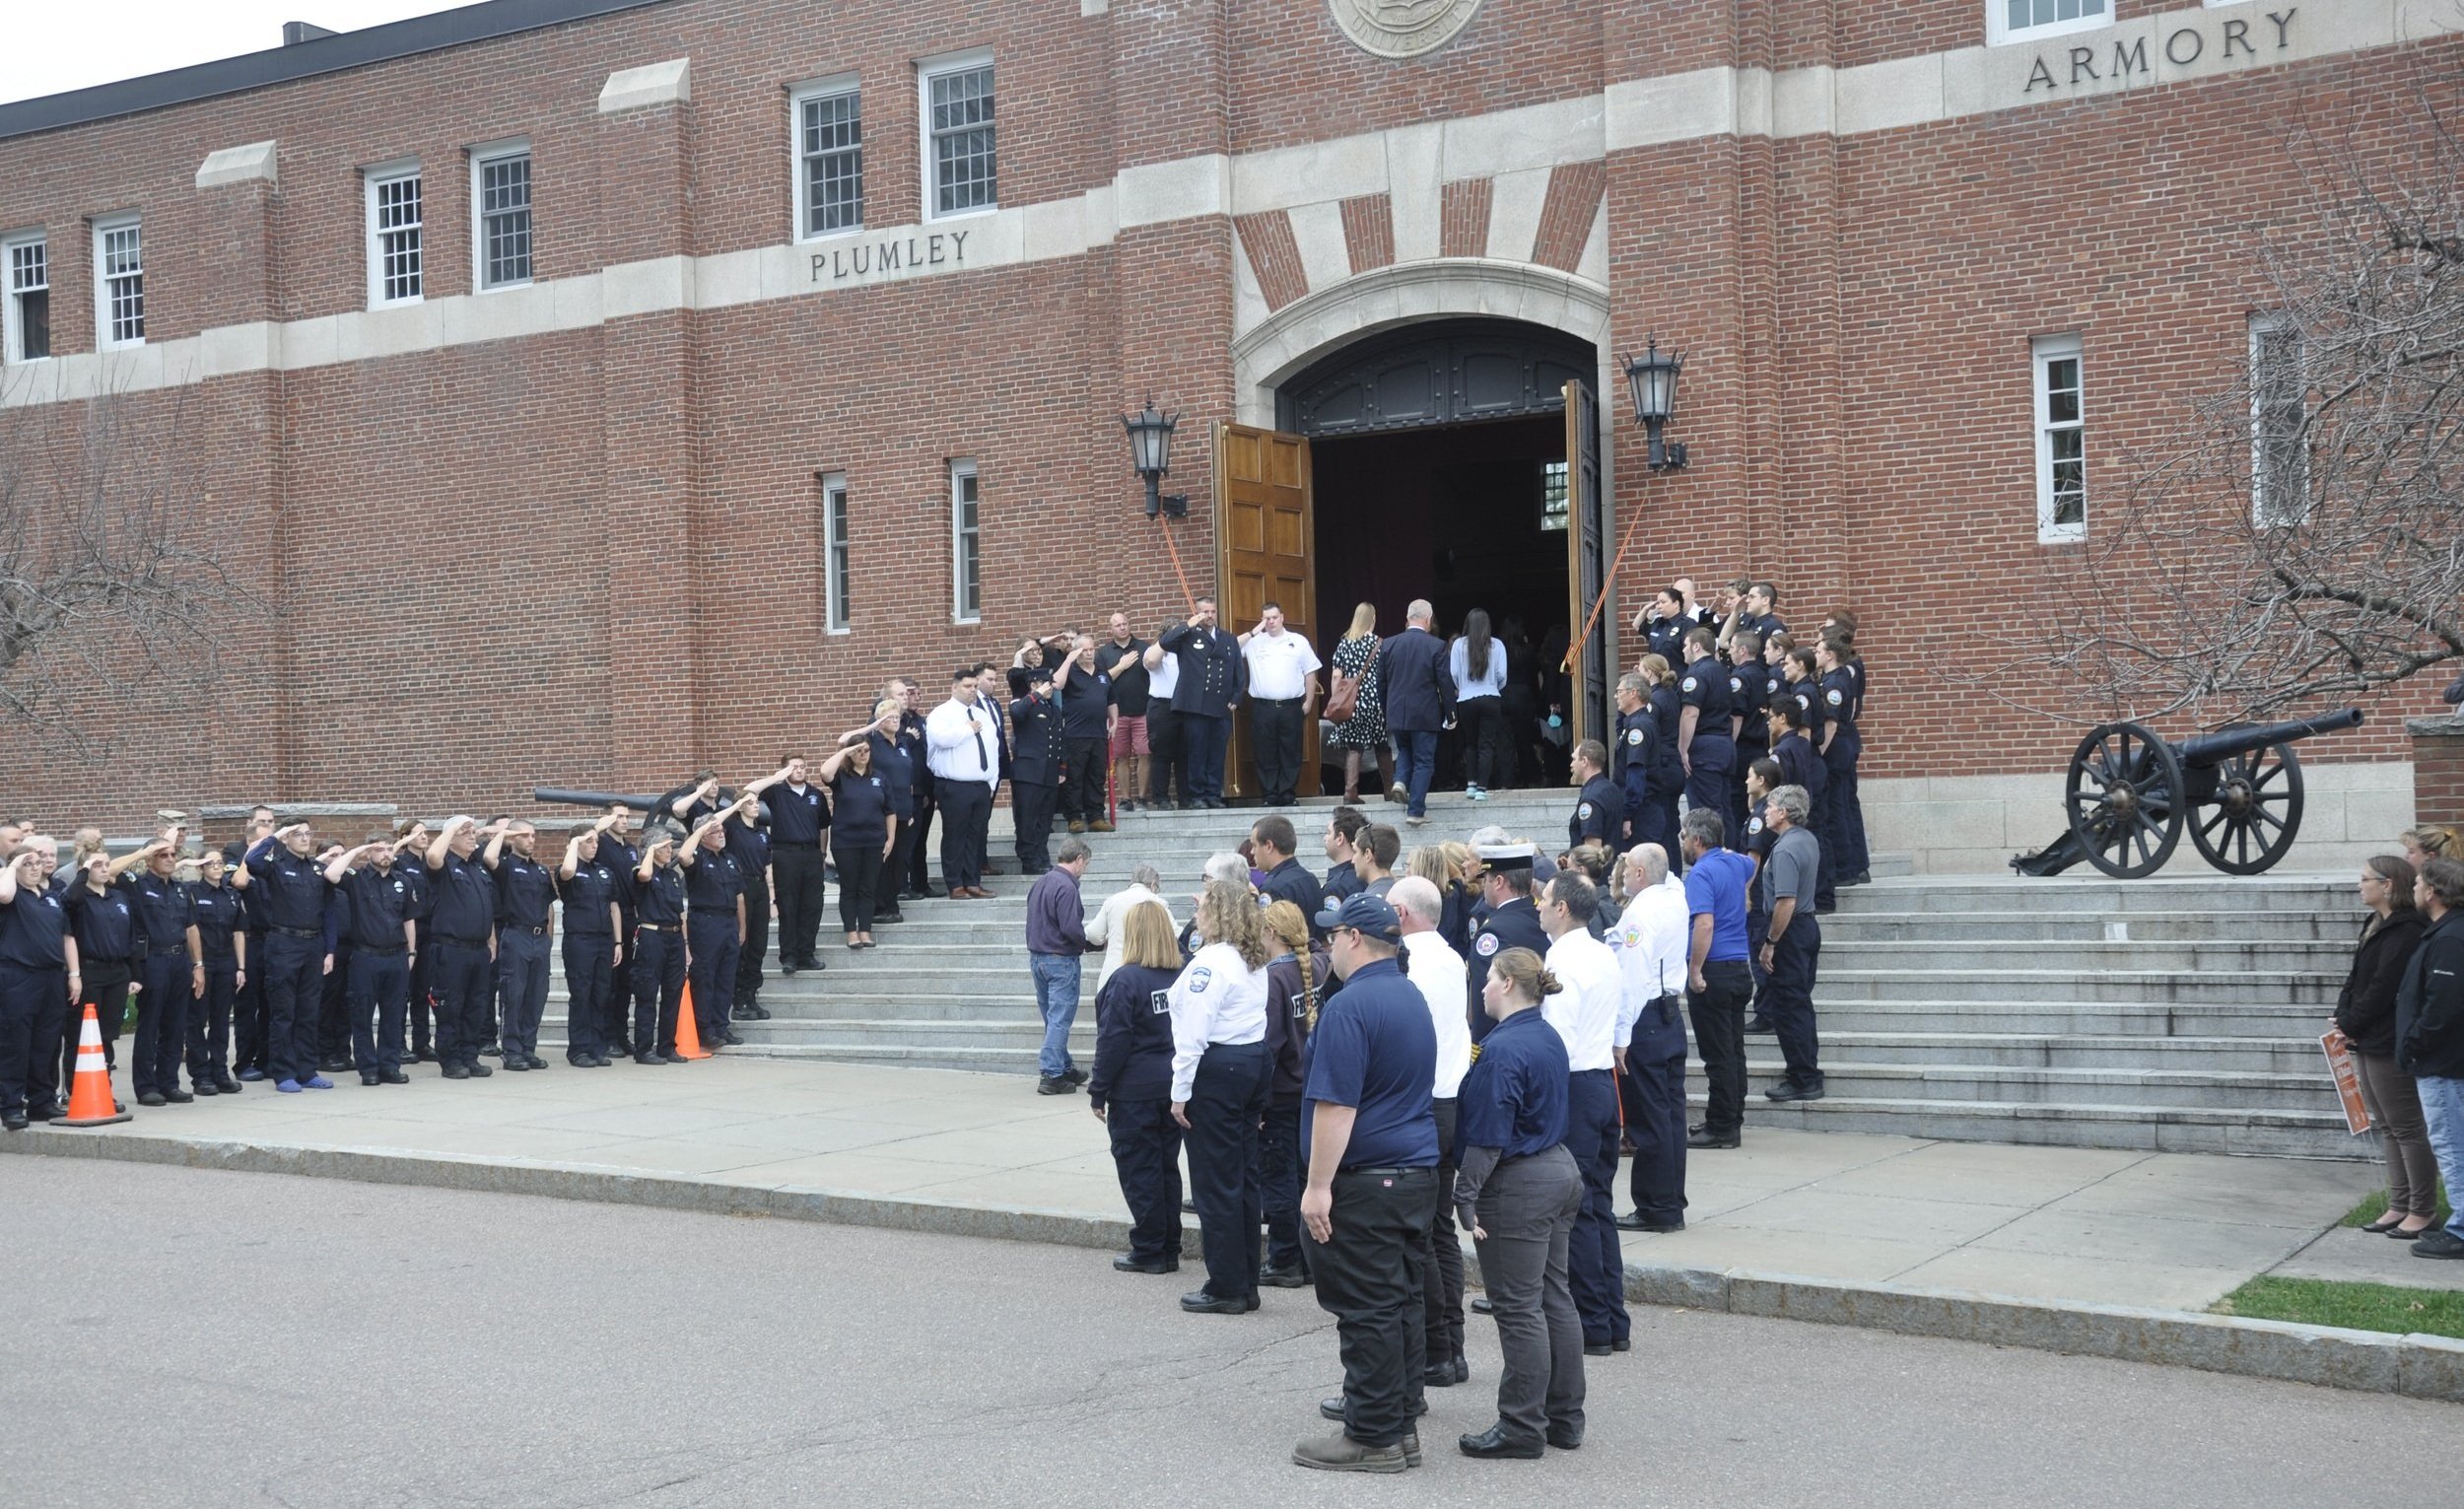  EMS members from multiple agencies line the stairs into the armory. Photo by Lisa Scagliotti 